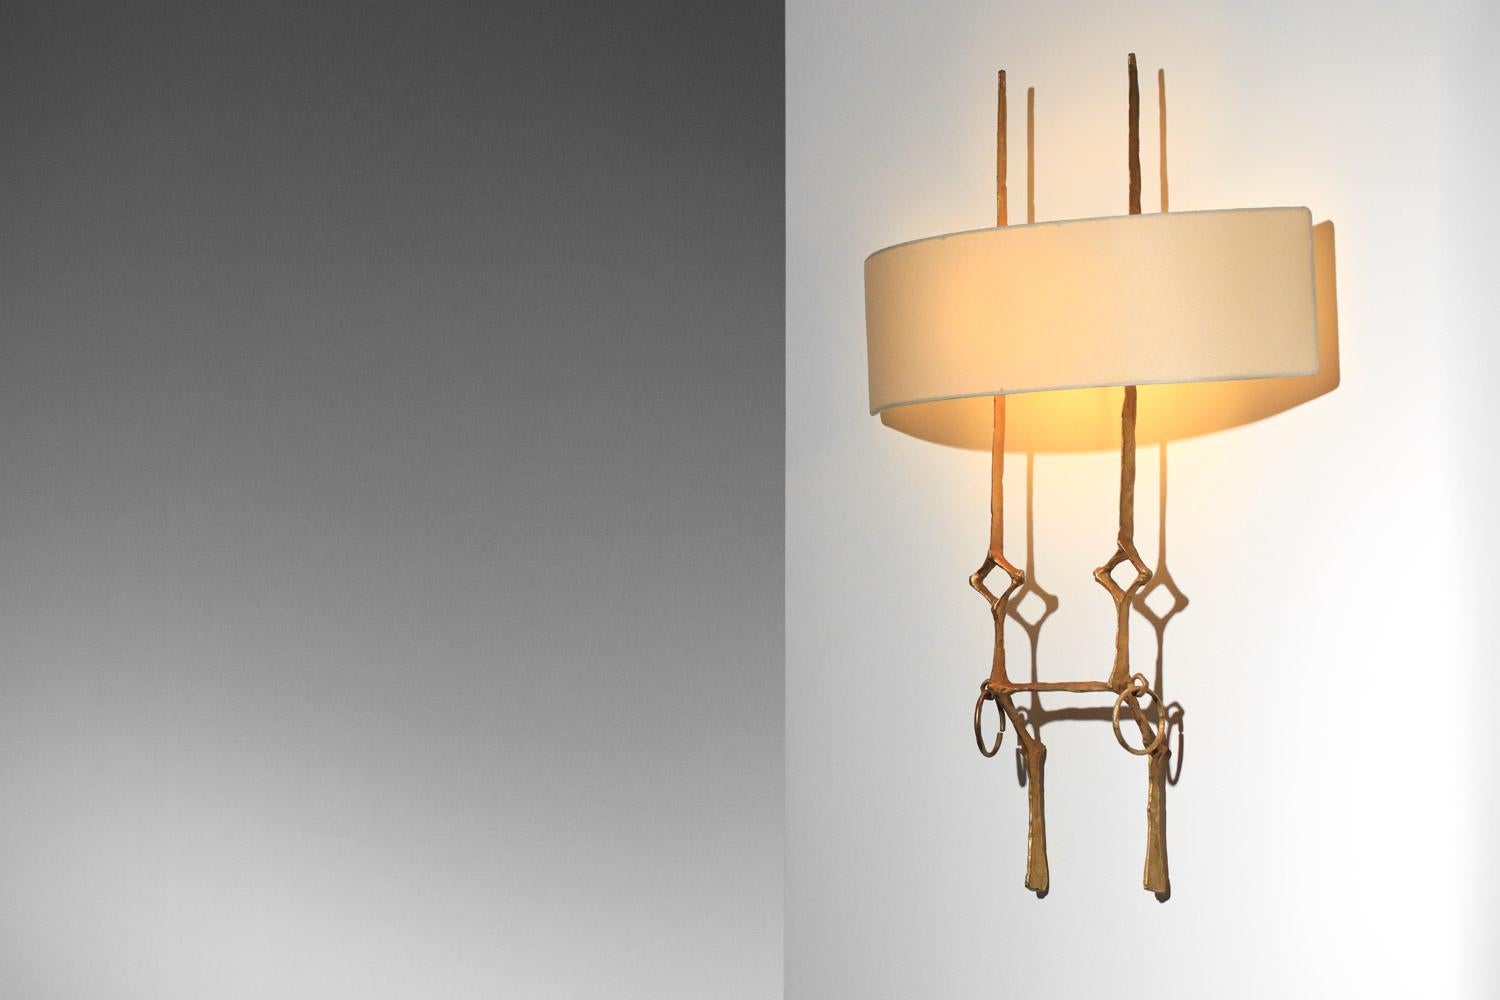 Beautiful pair of French wall lamps from the 1950s by designer and artist Felix Agostini, 